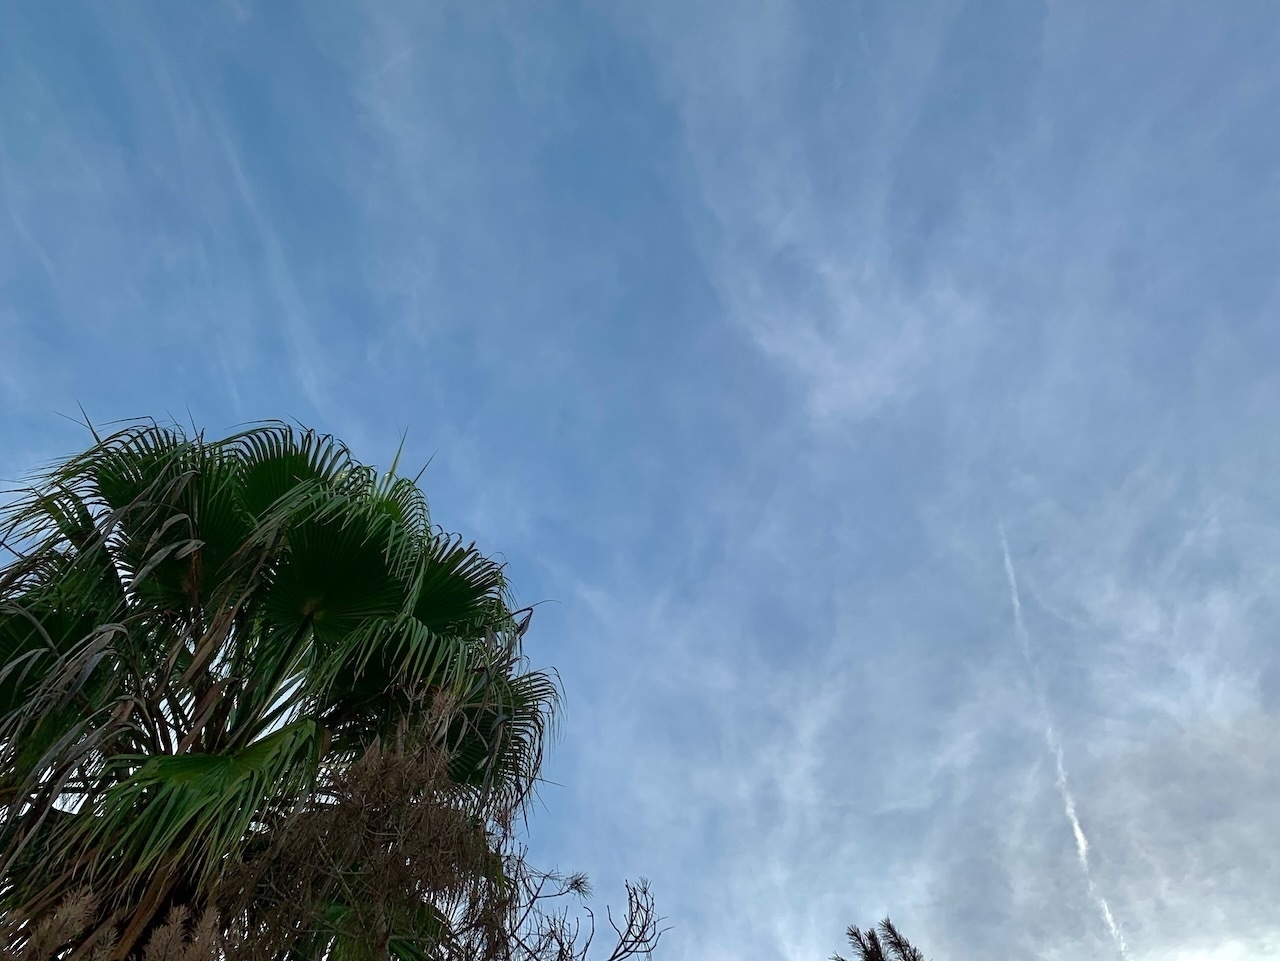 View of blue sky with wispy clouds and a faint condensation trail. There is a palm tree in the lower left corner.